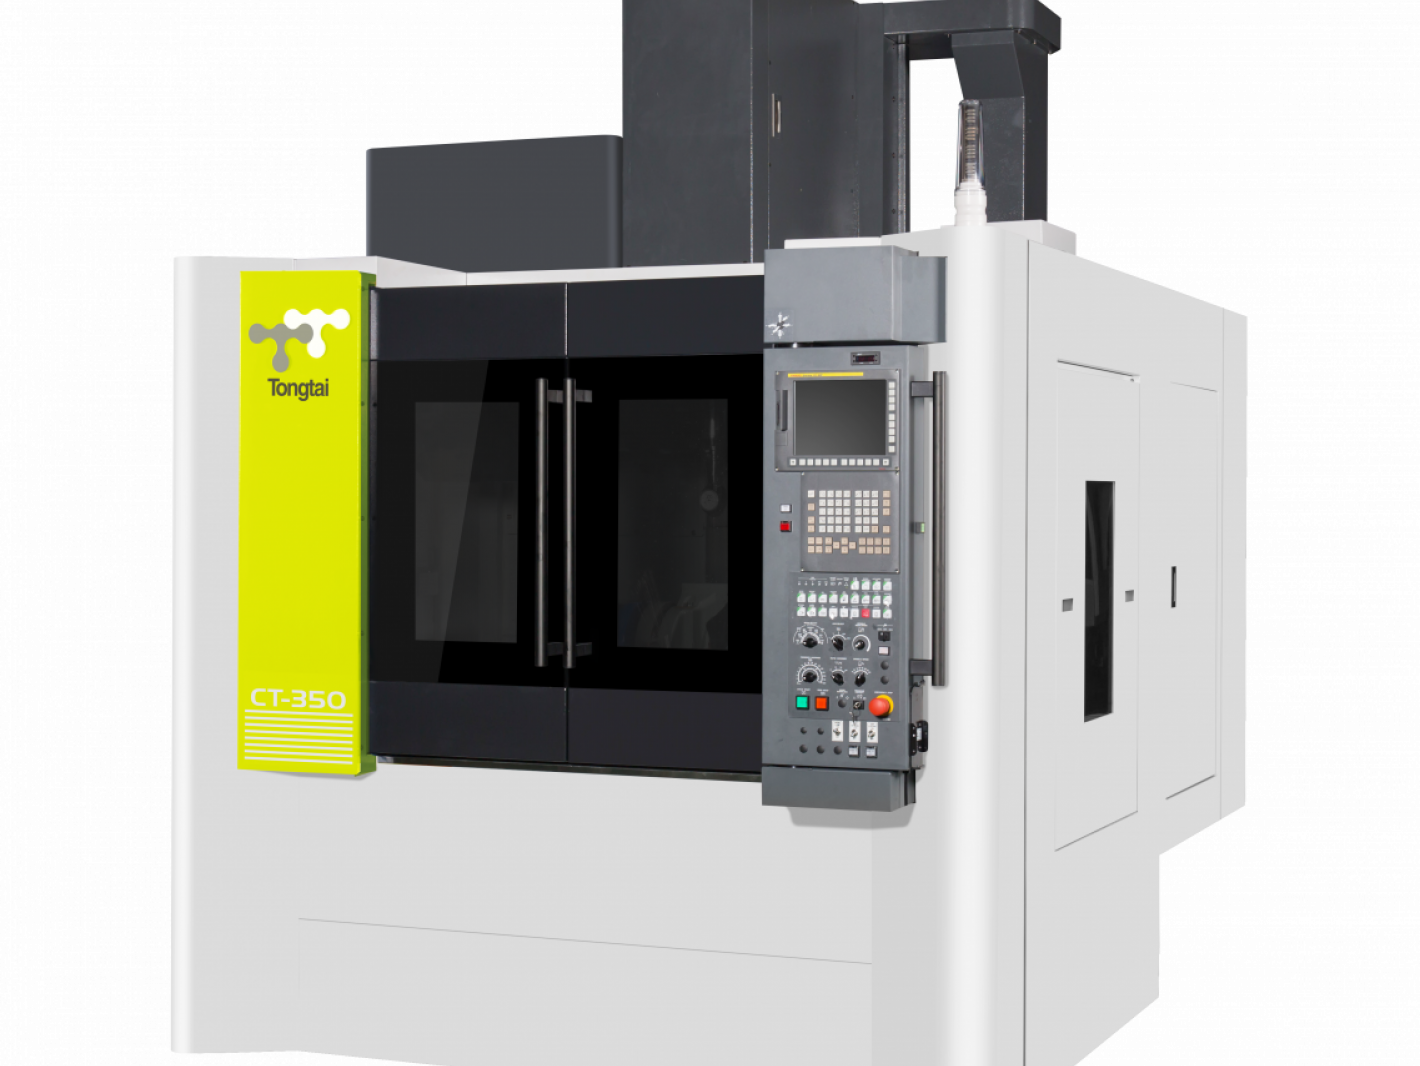 5-axis Machining Center (CT-350) by Tongtai Machine & Tool Co., Ltd.